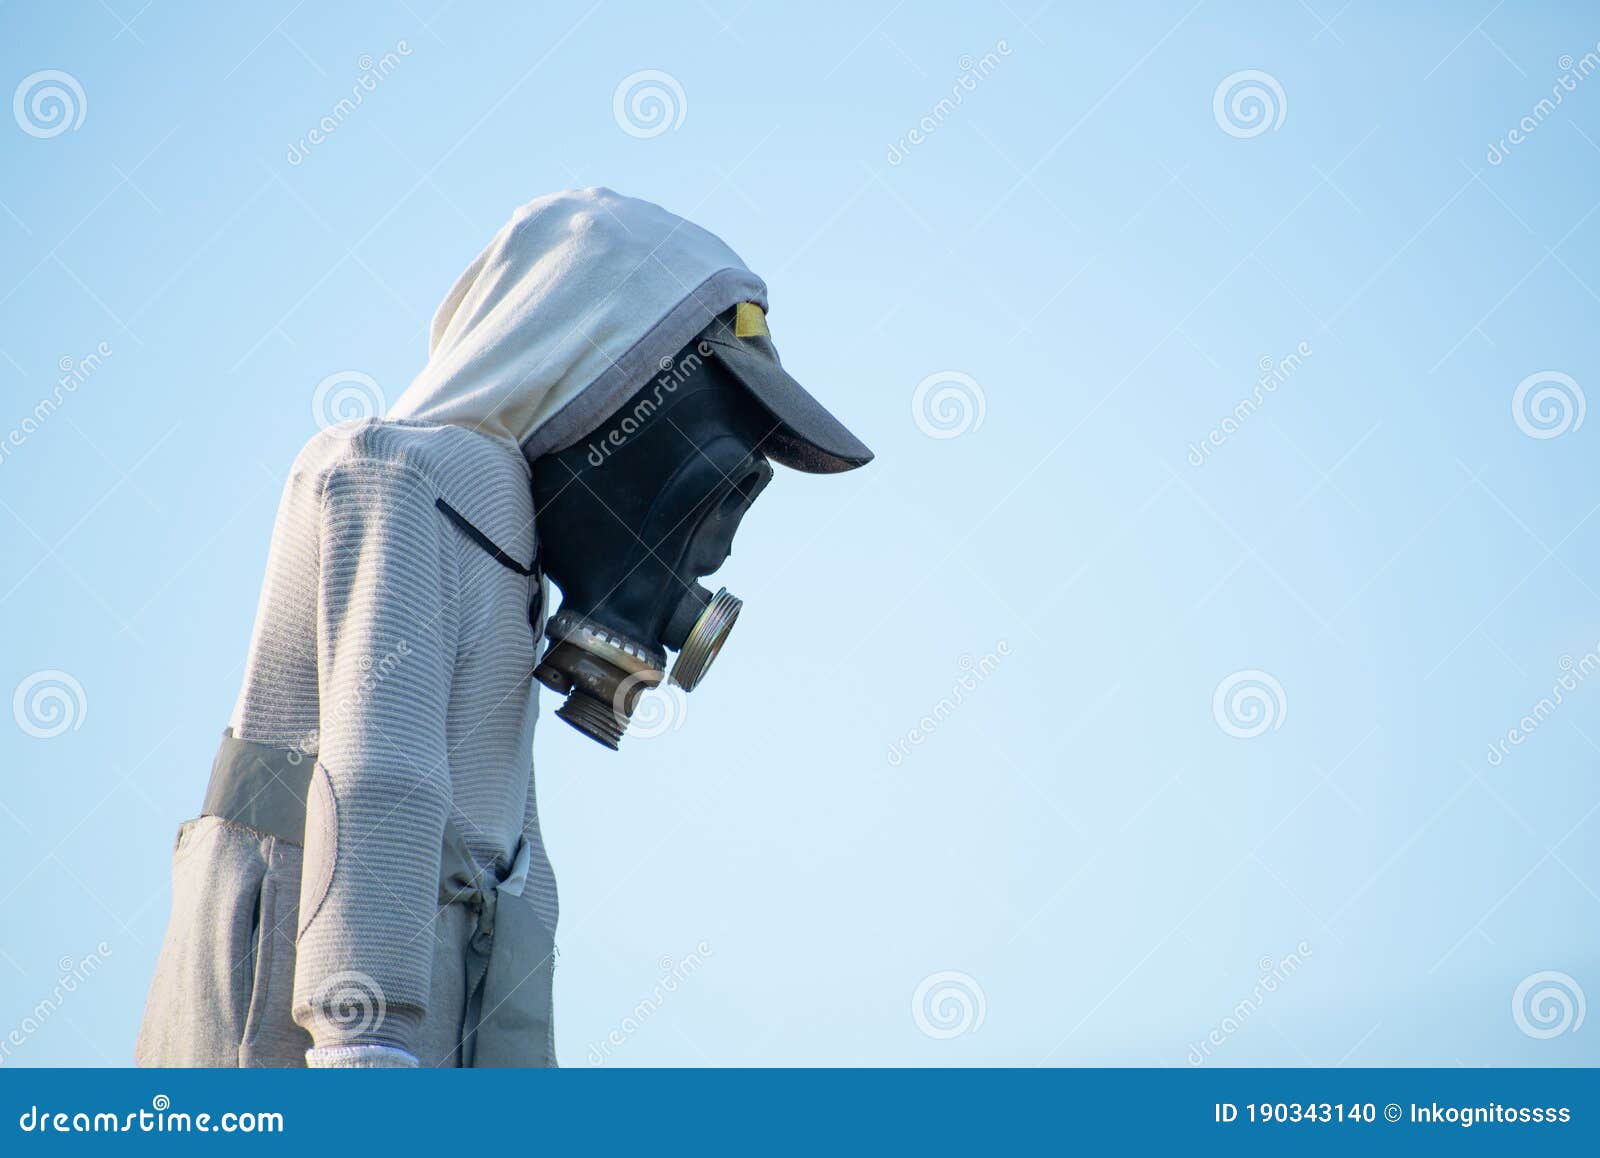 scarecrow with gas mask against blue sky